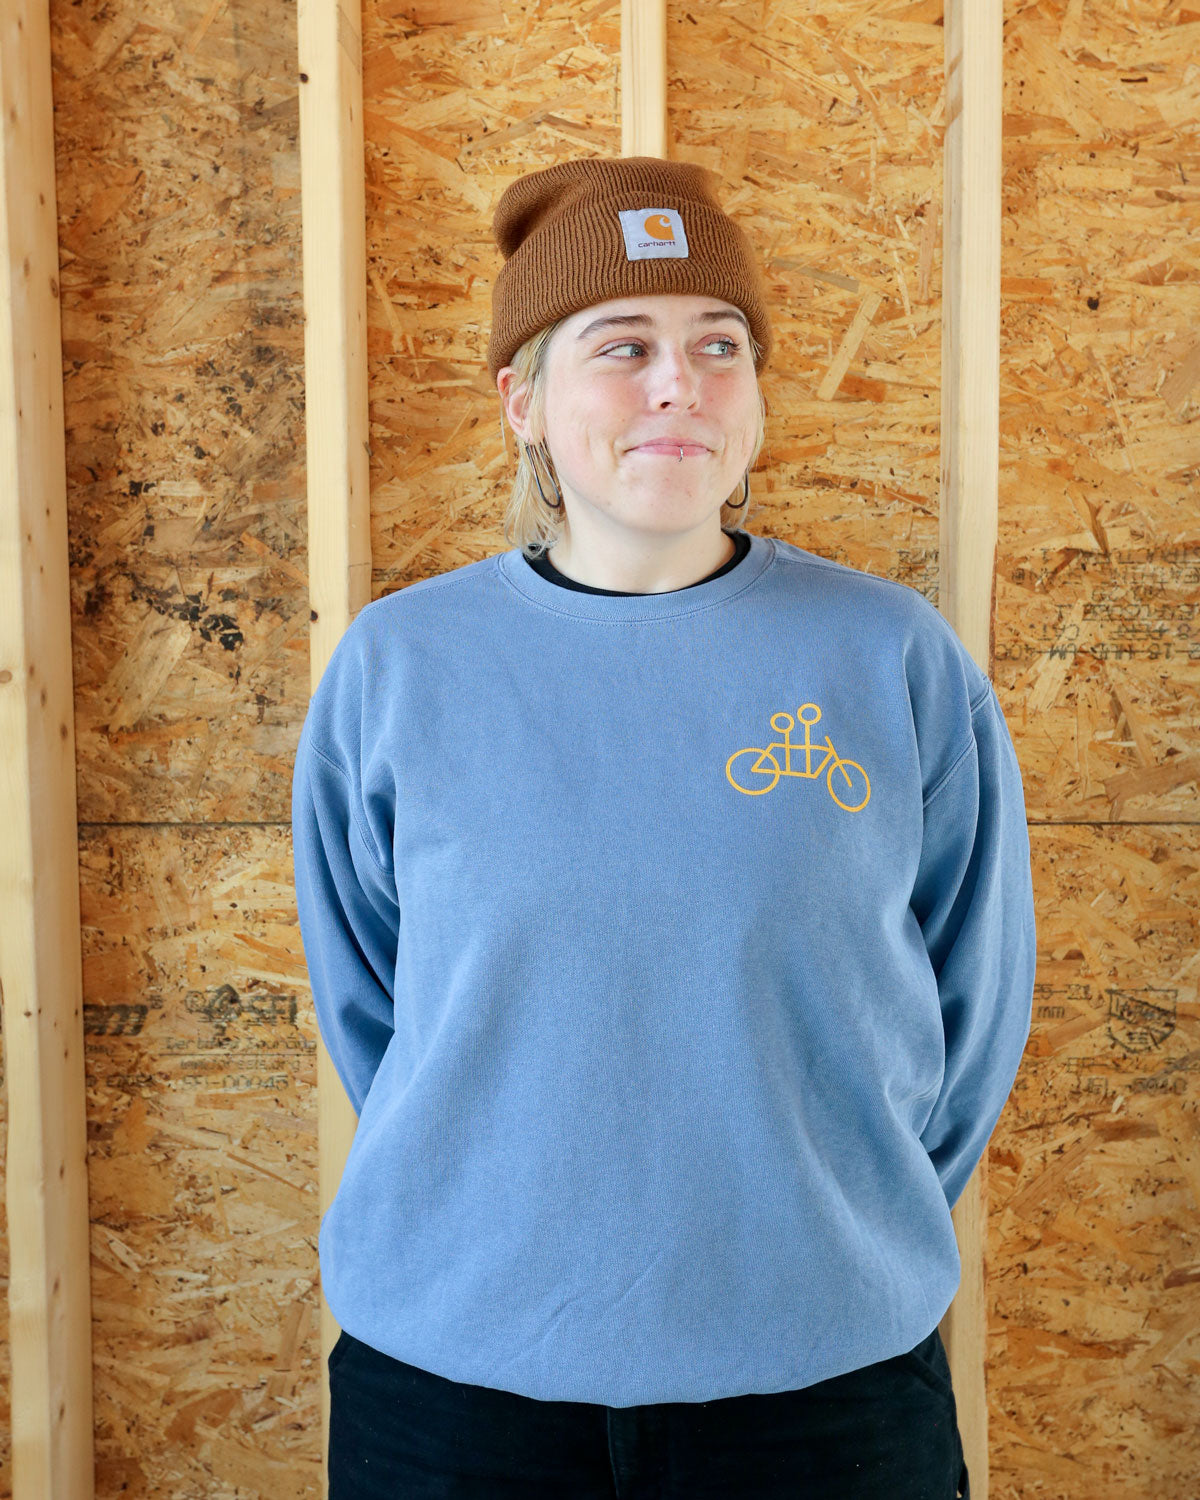 A person wearing a Tandem Crewneck Sweatshirt with a bicycle graphic and a brown beanie stands smiling against a plywood wall background.